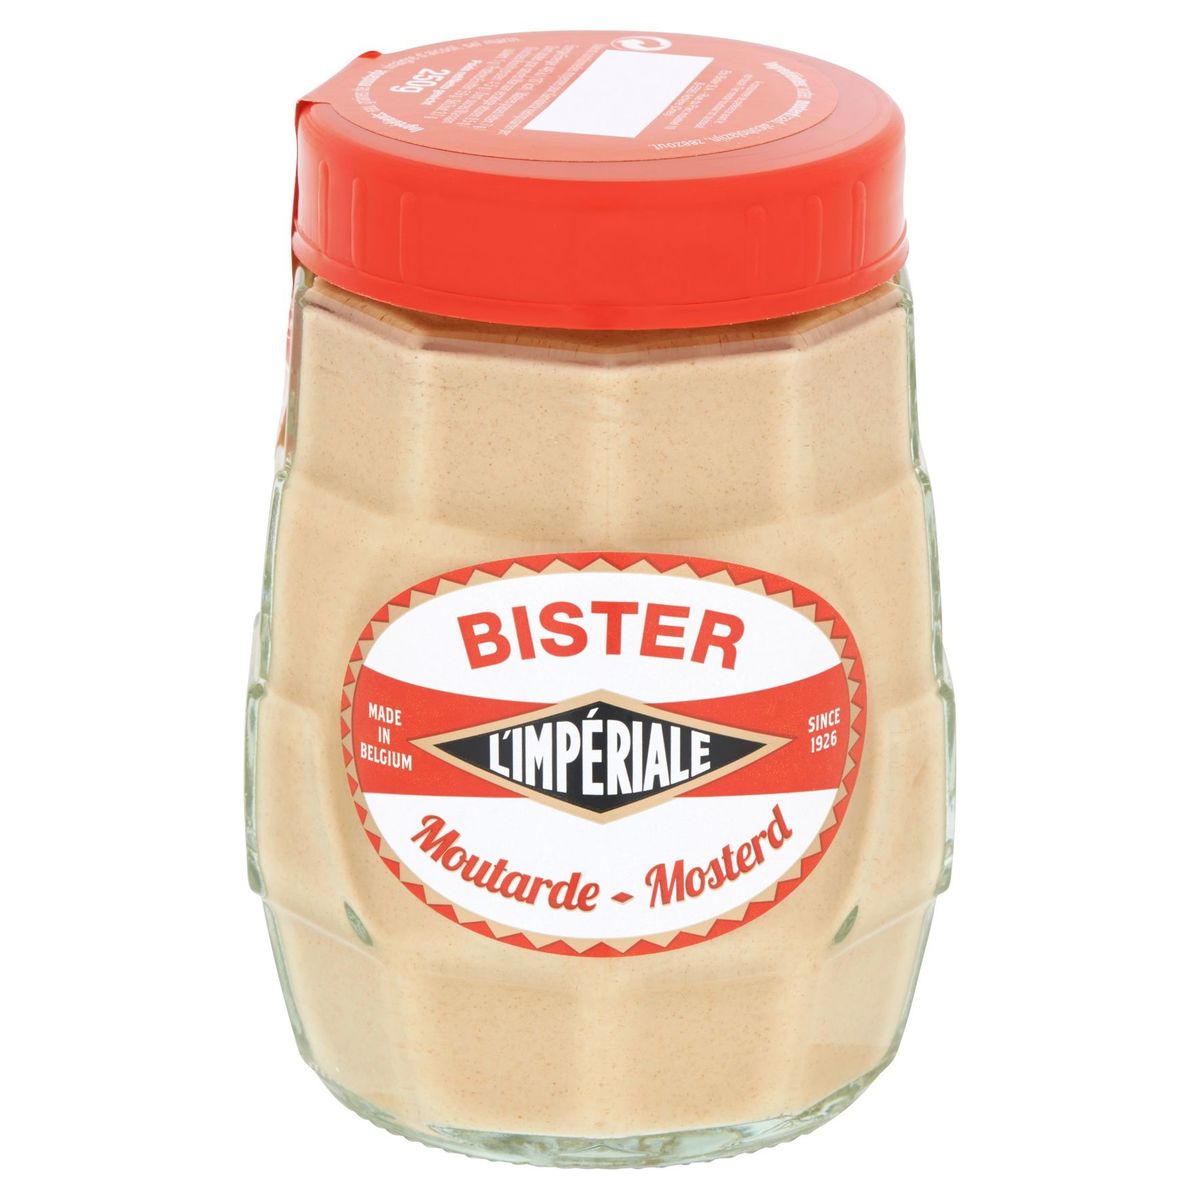 Bister L'Impériale Mosterd 250 g